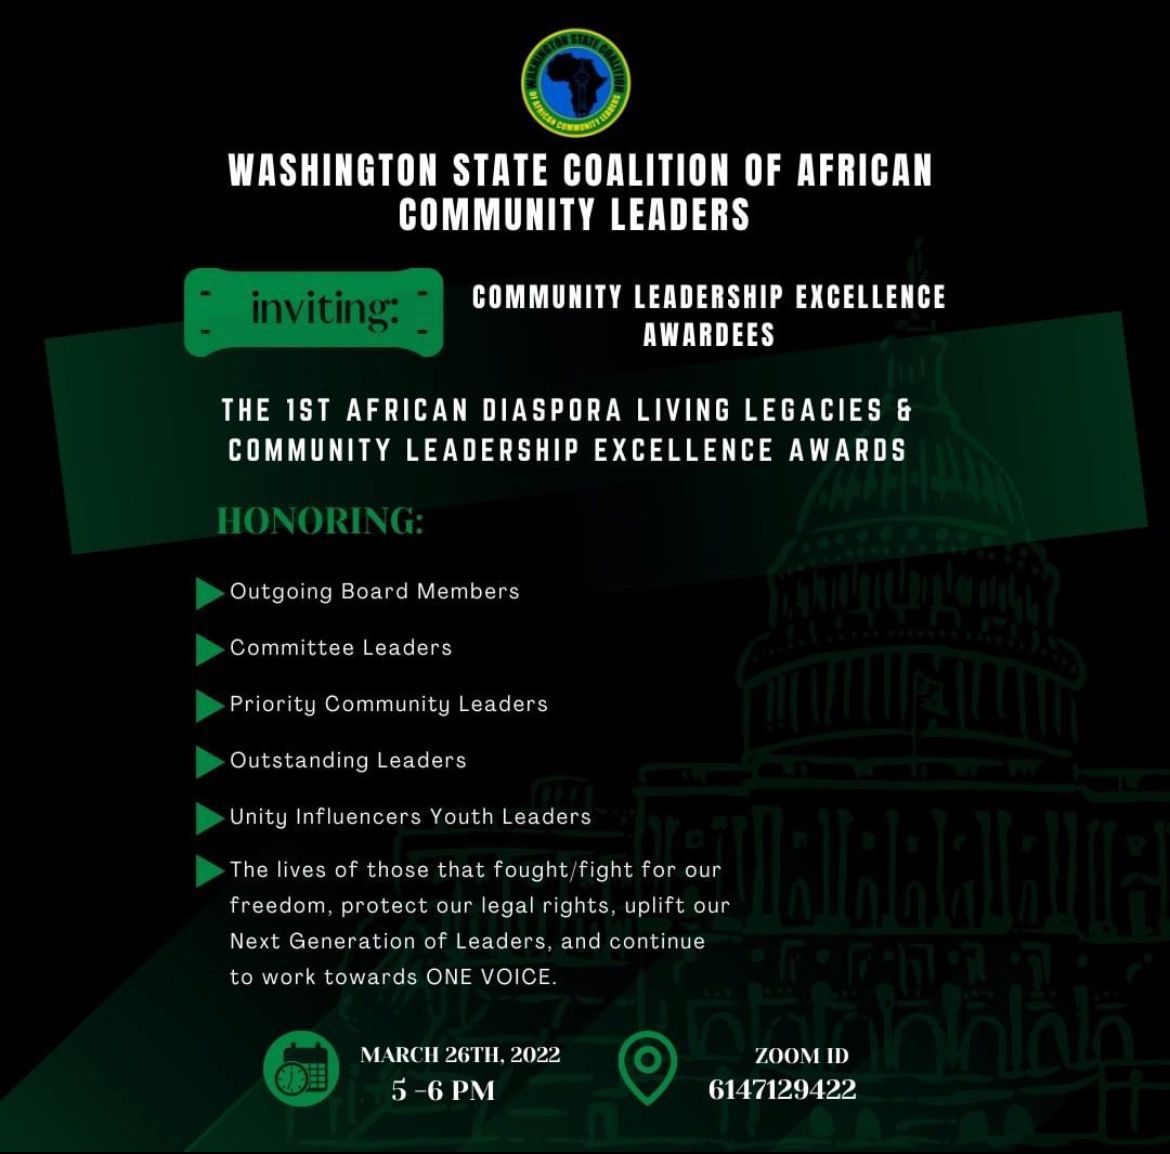 WE ARE EXCITED TO INVITE YOU TO THE WSCACL 1ST AFRICAN DIASPORA LIVING LEGACIES & COMMUNITY LEADERSHIP EXCELLENCE AWARDS!